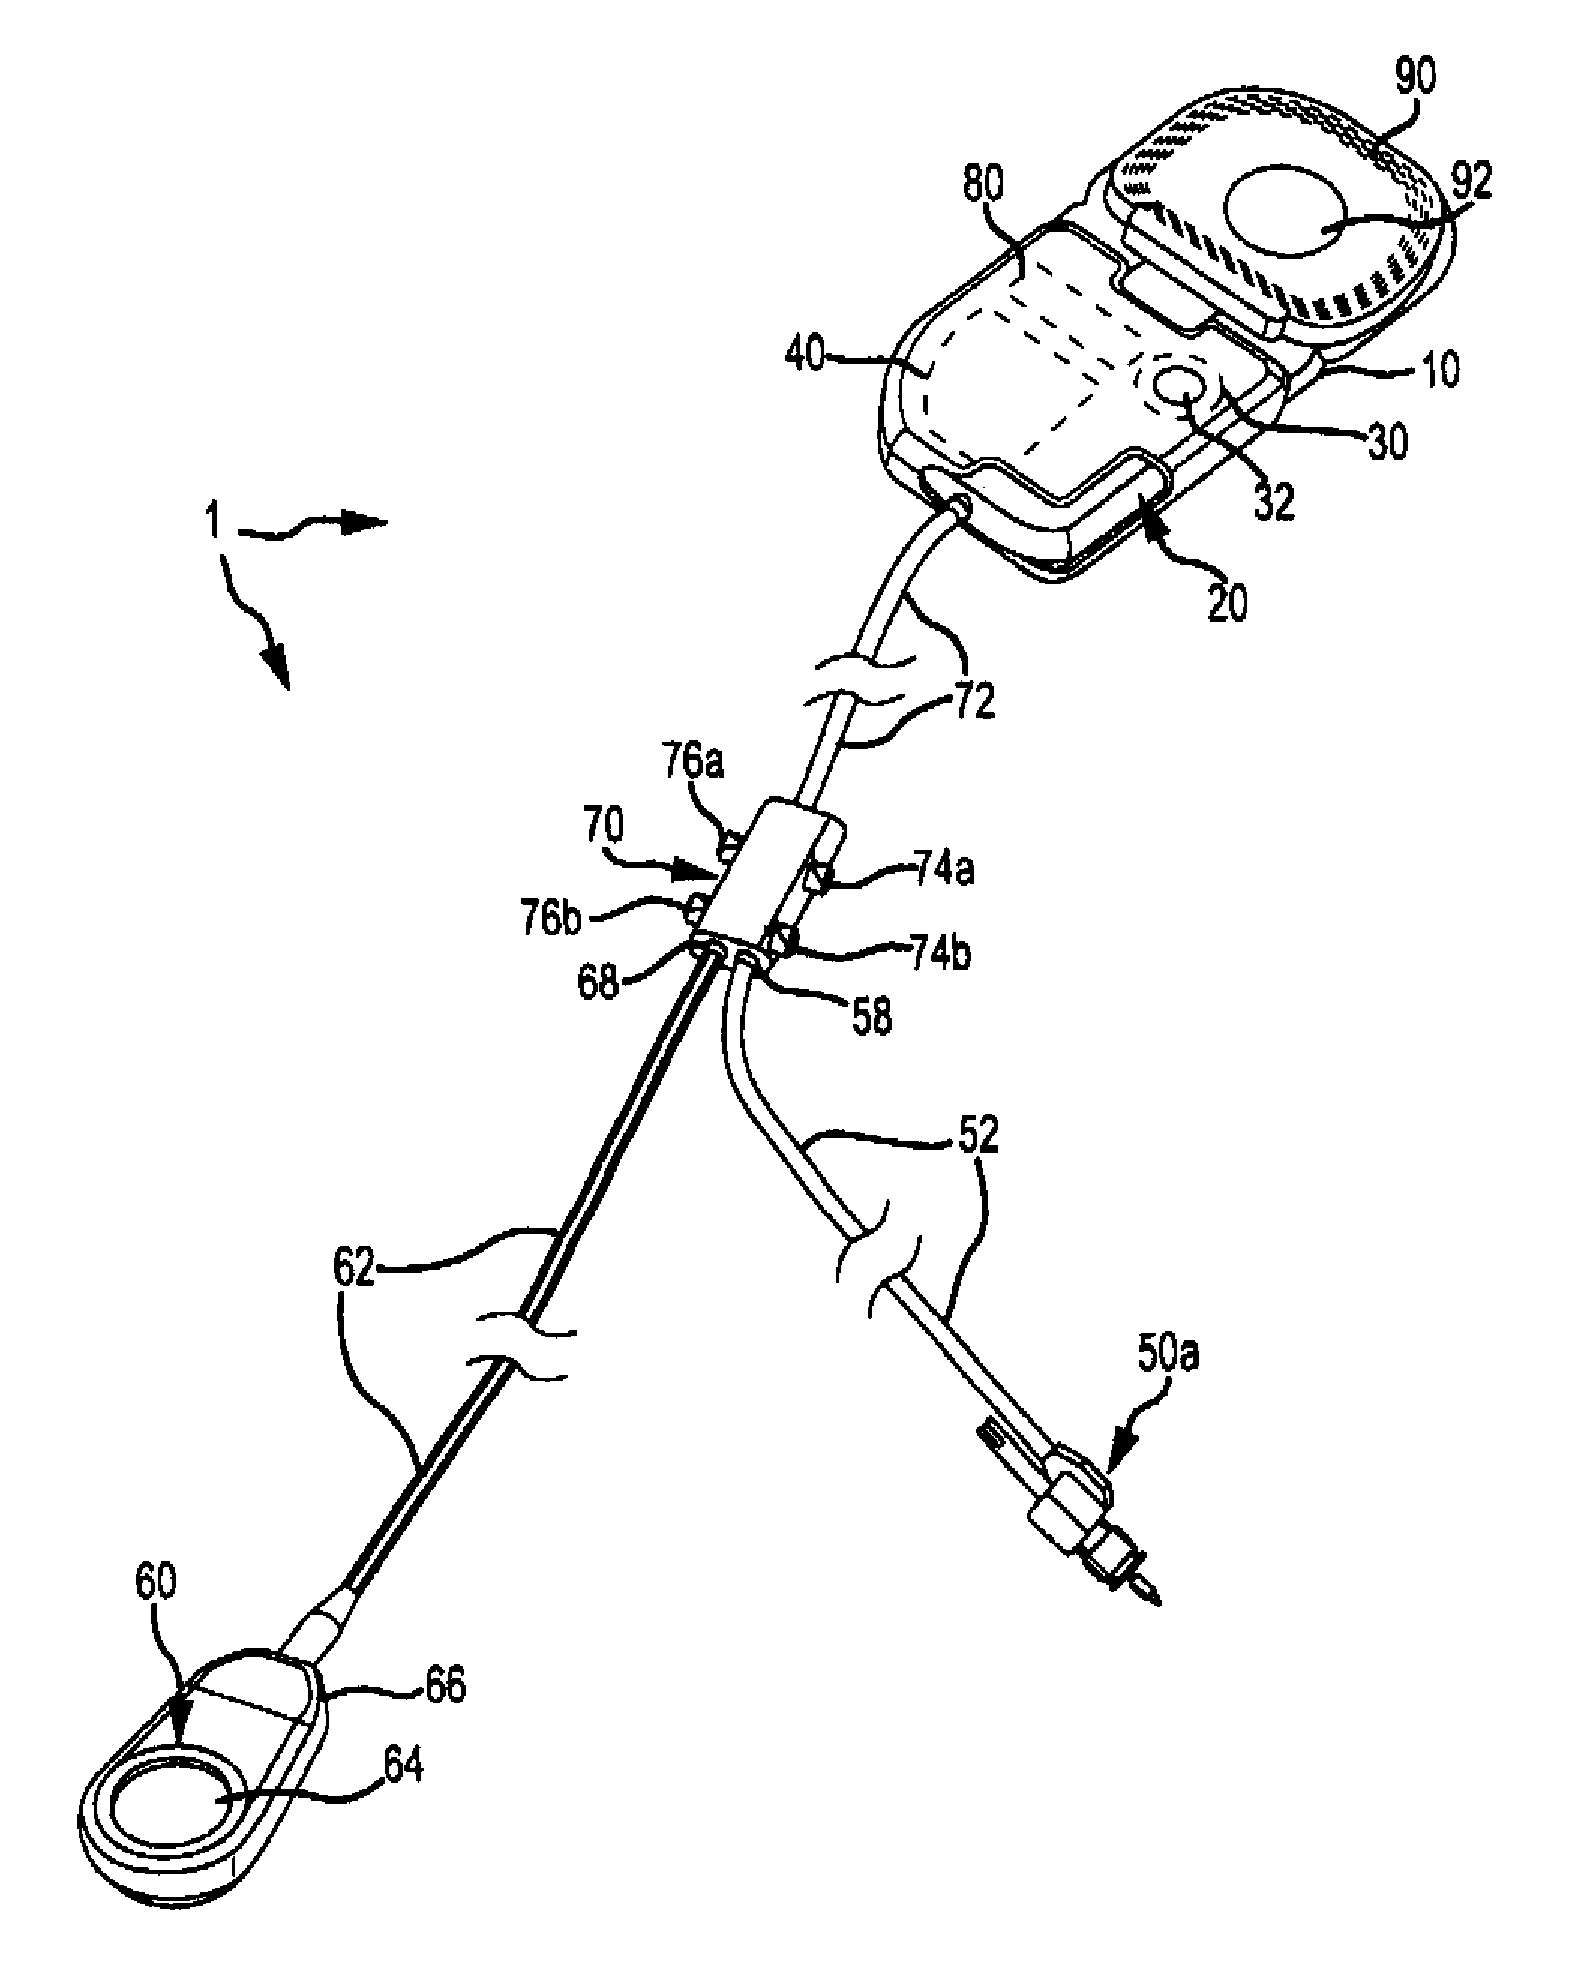 Implantable auditory stimulation system and method with offset implanted microphones